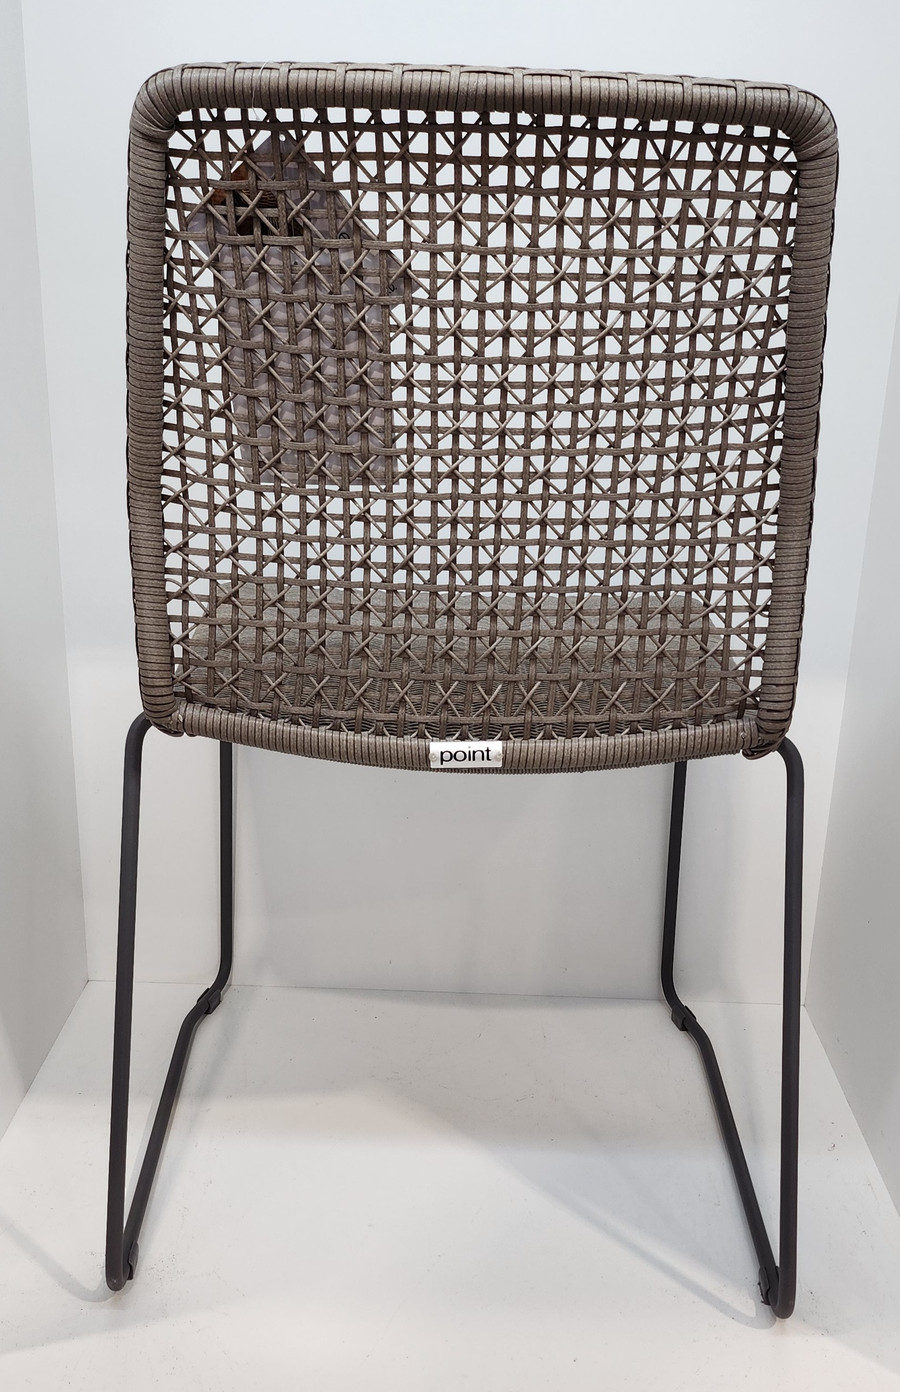 PAX Outdoor Dining Side Chair in Pebble colour - rear view